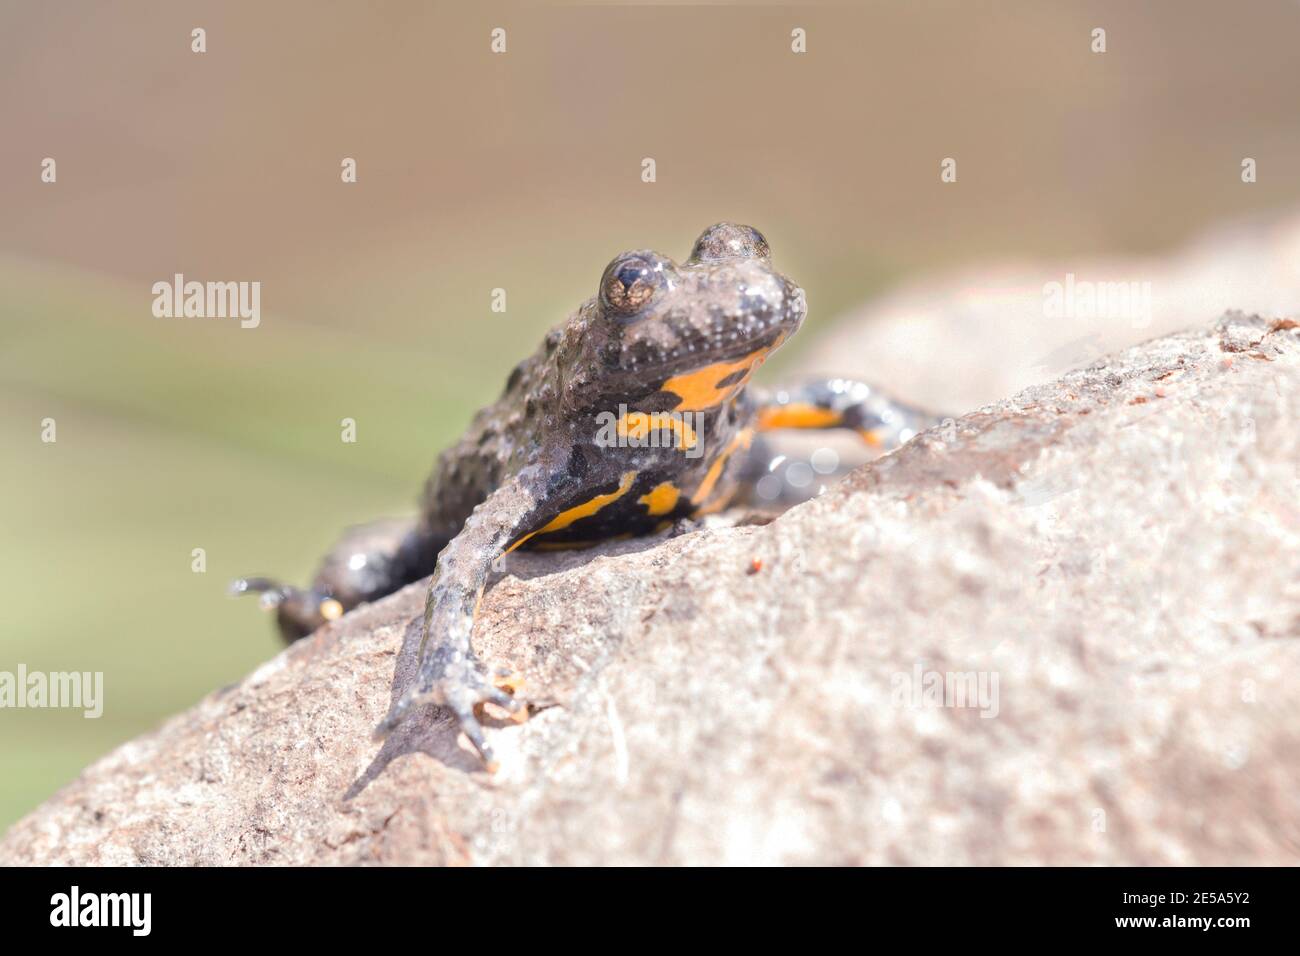 yellow-bellied toad, yellowbelly toad, variegated fire-toad (Bombina variegata), sitting on a rock, Germany Stock Photo